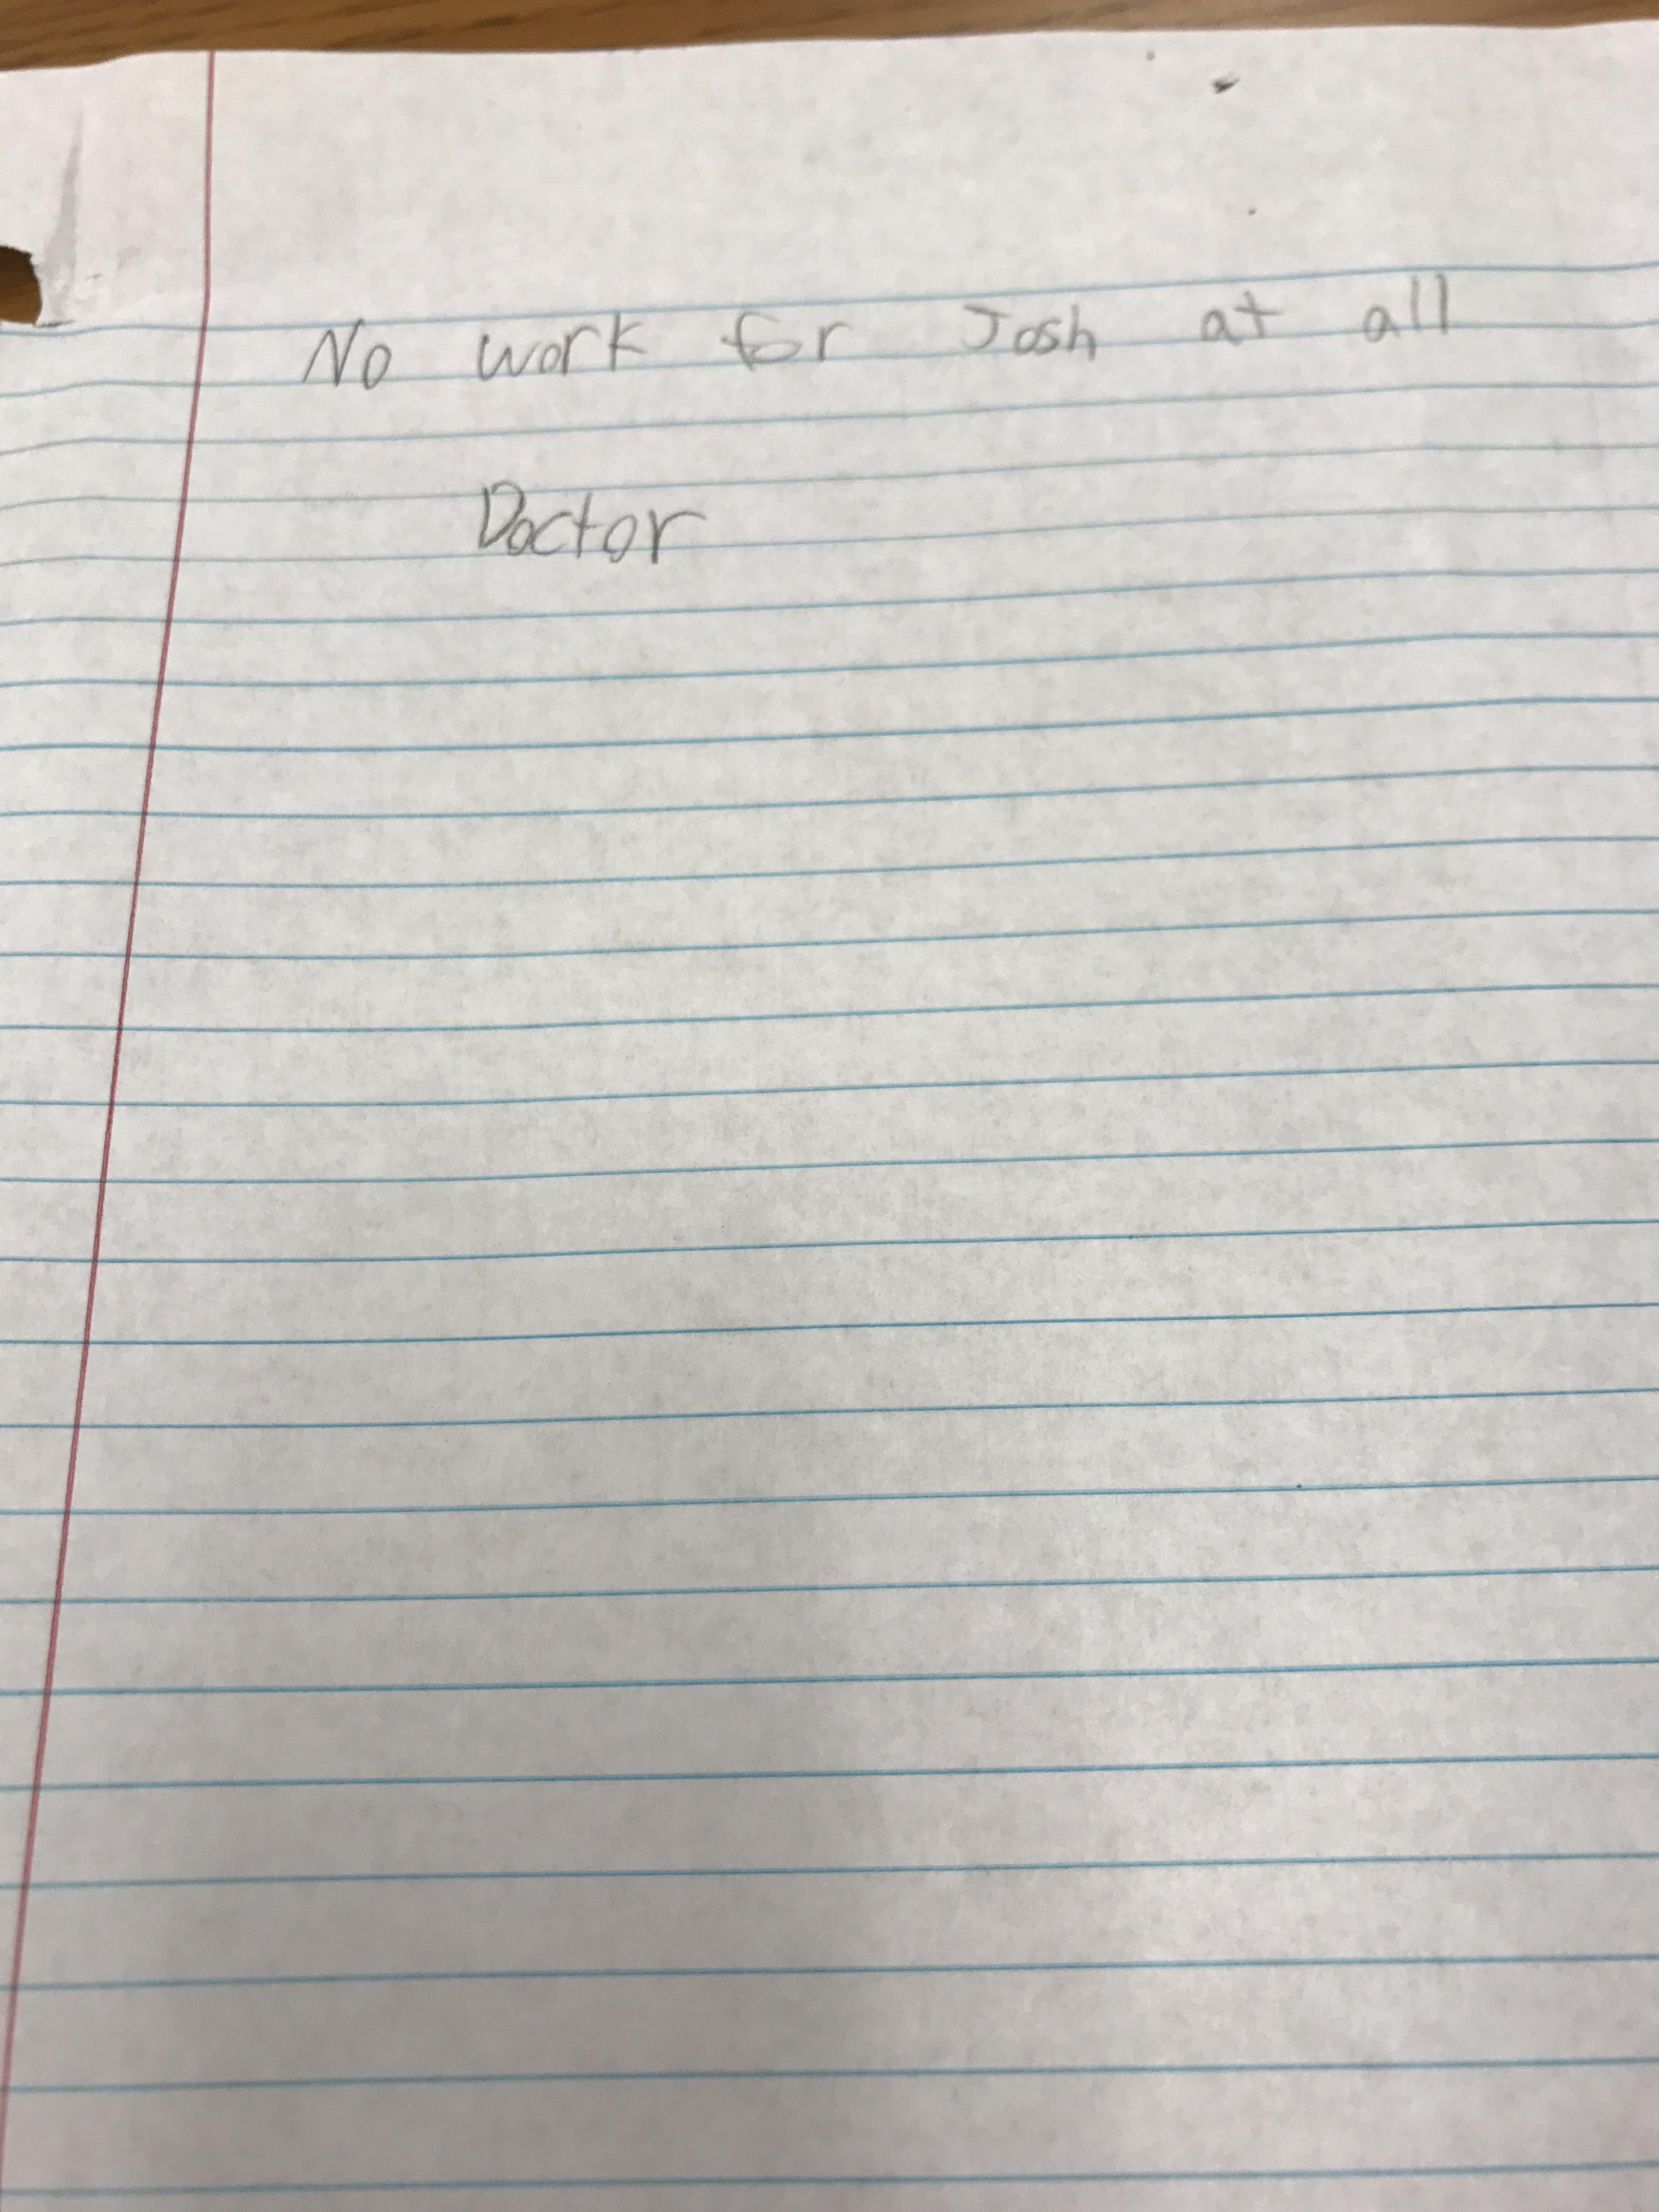 Student gave me this very convincing note in first period today.